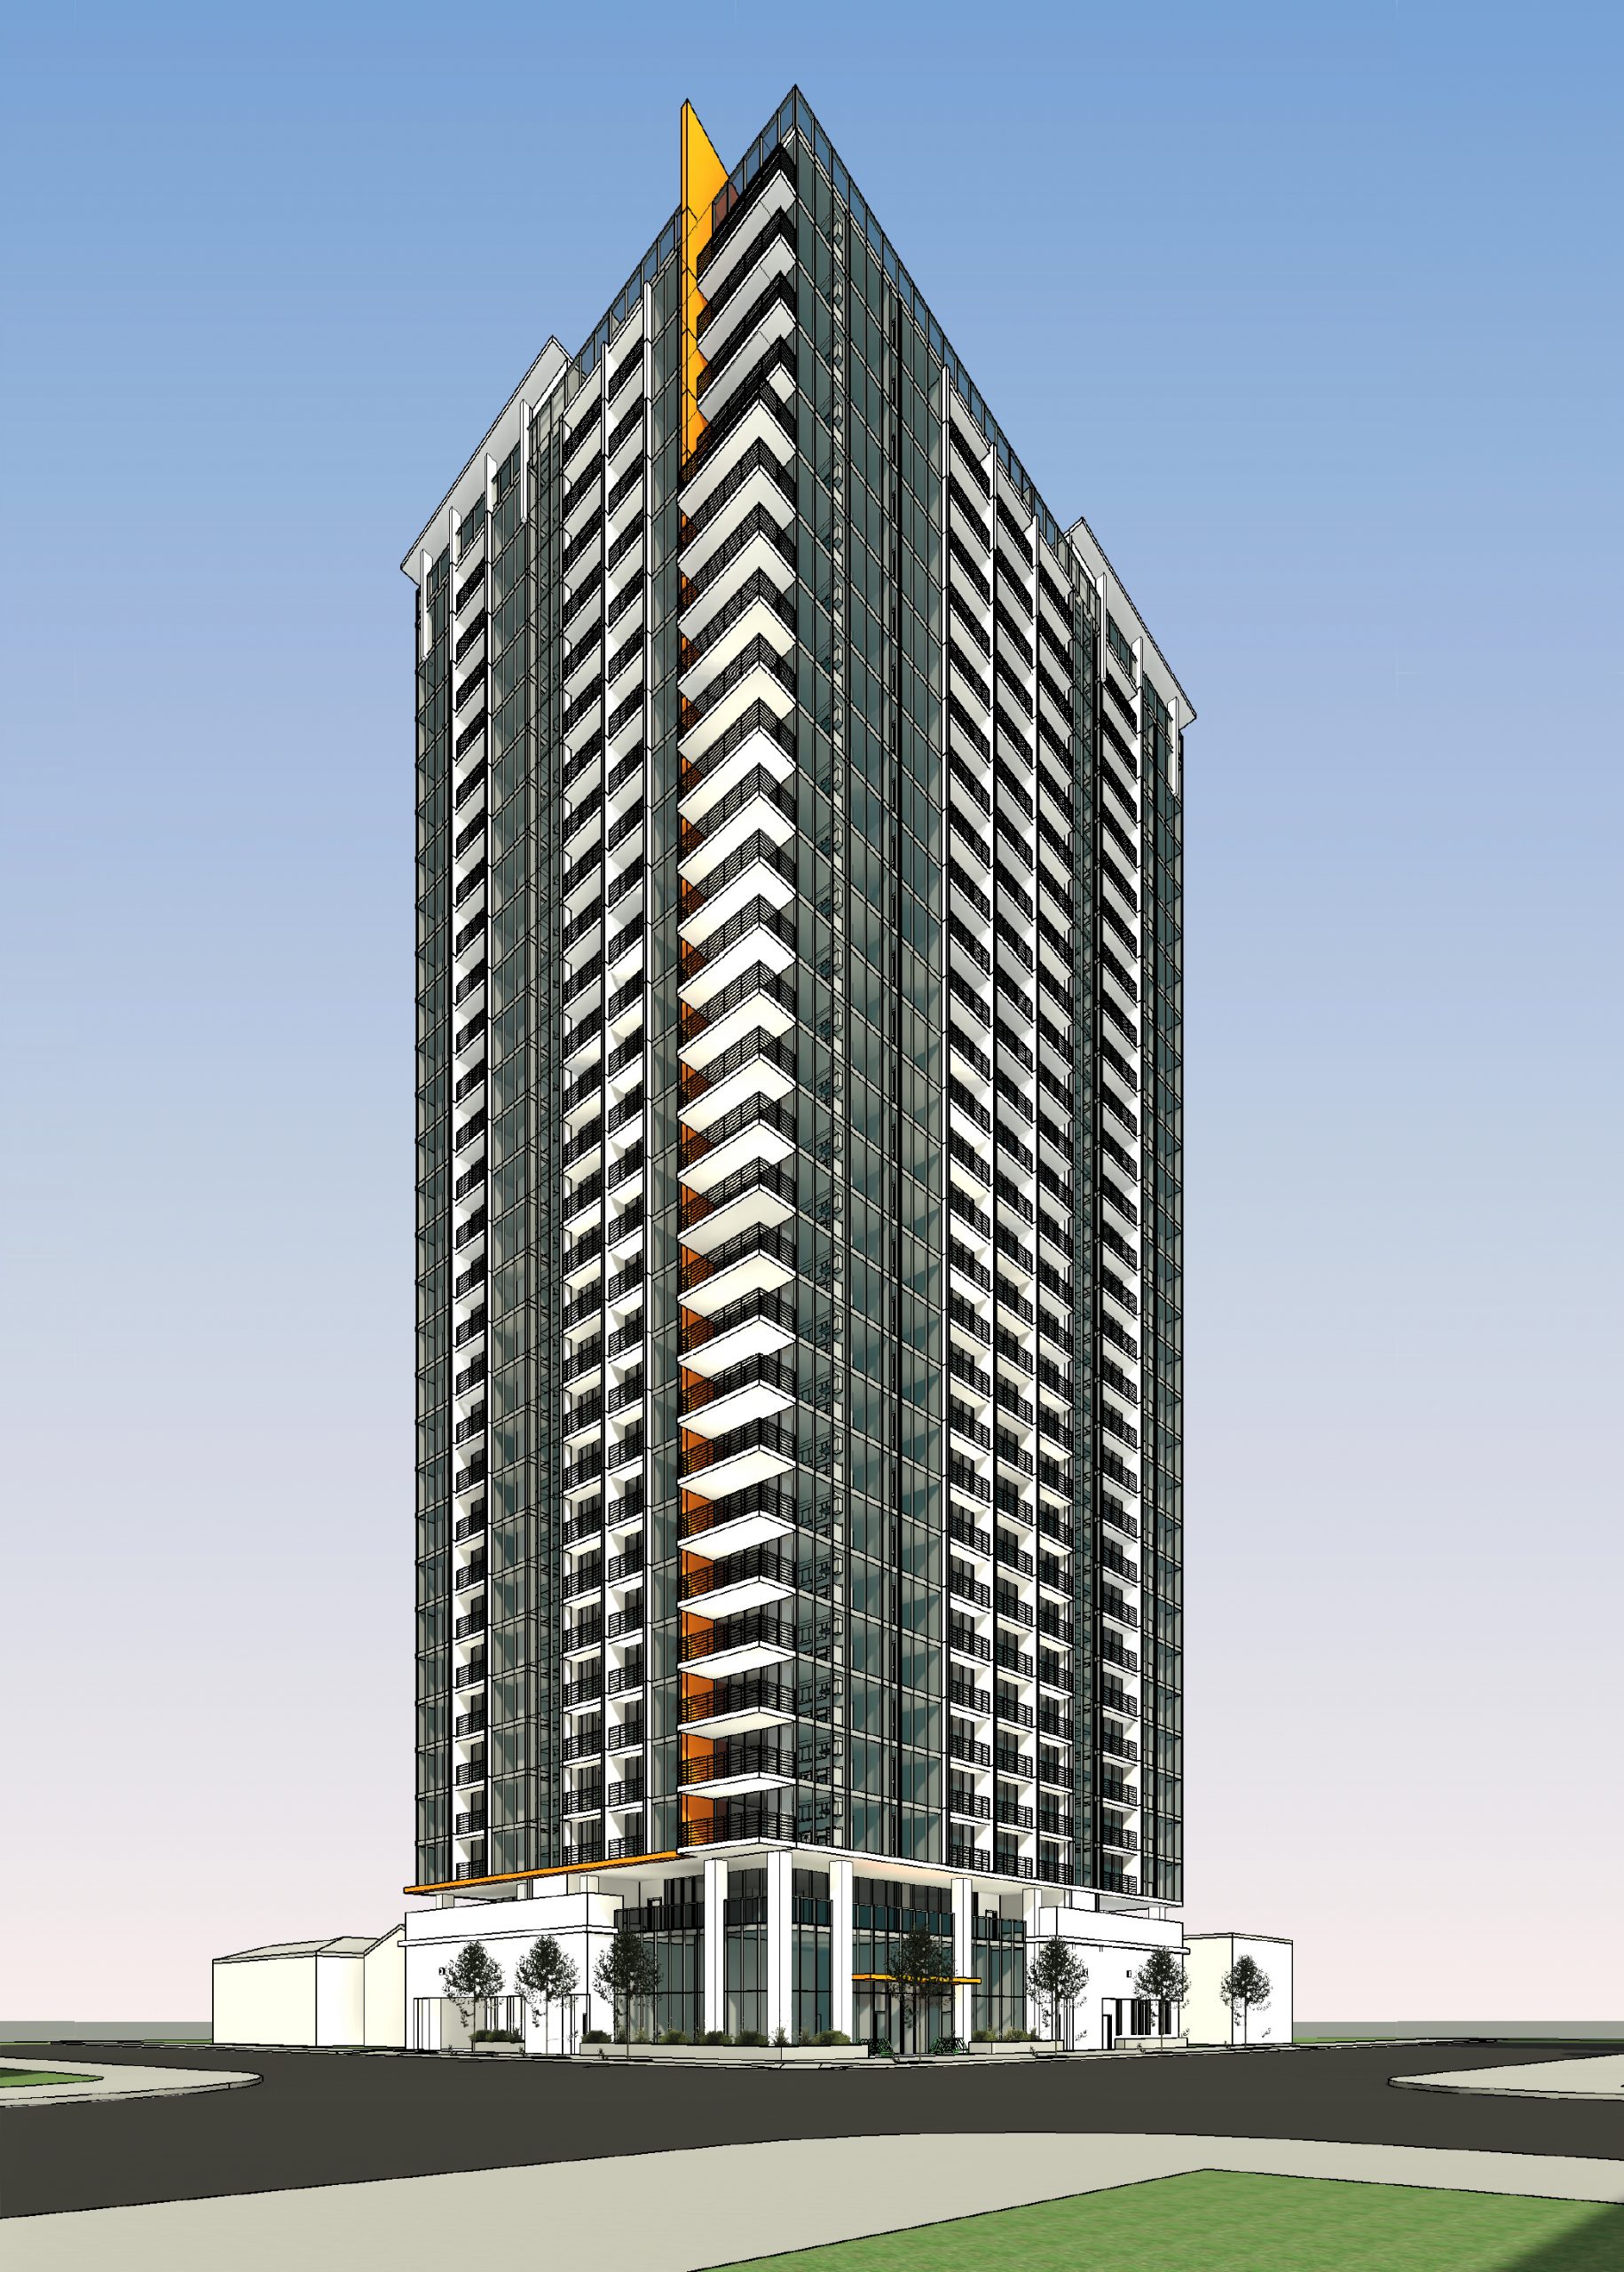 605 South Second Street, rendering by Anderson Architects